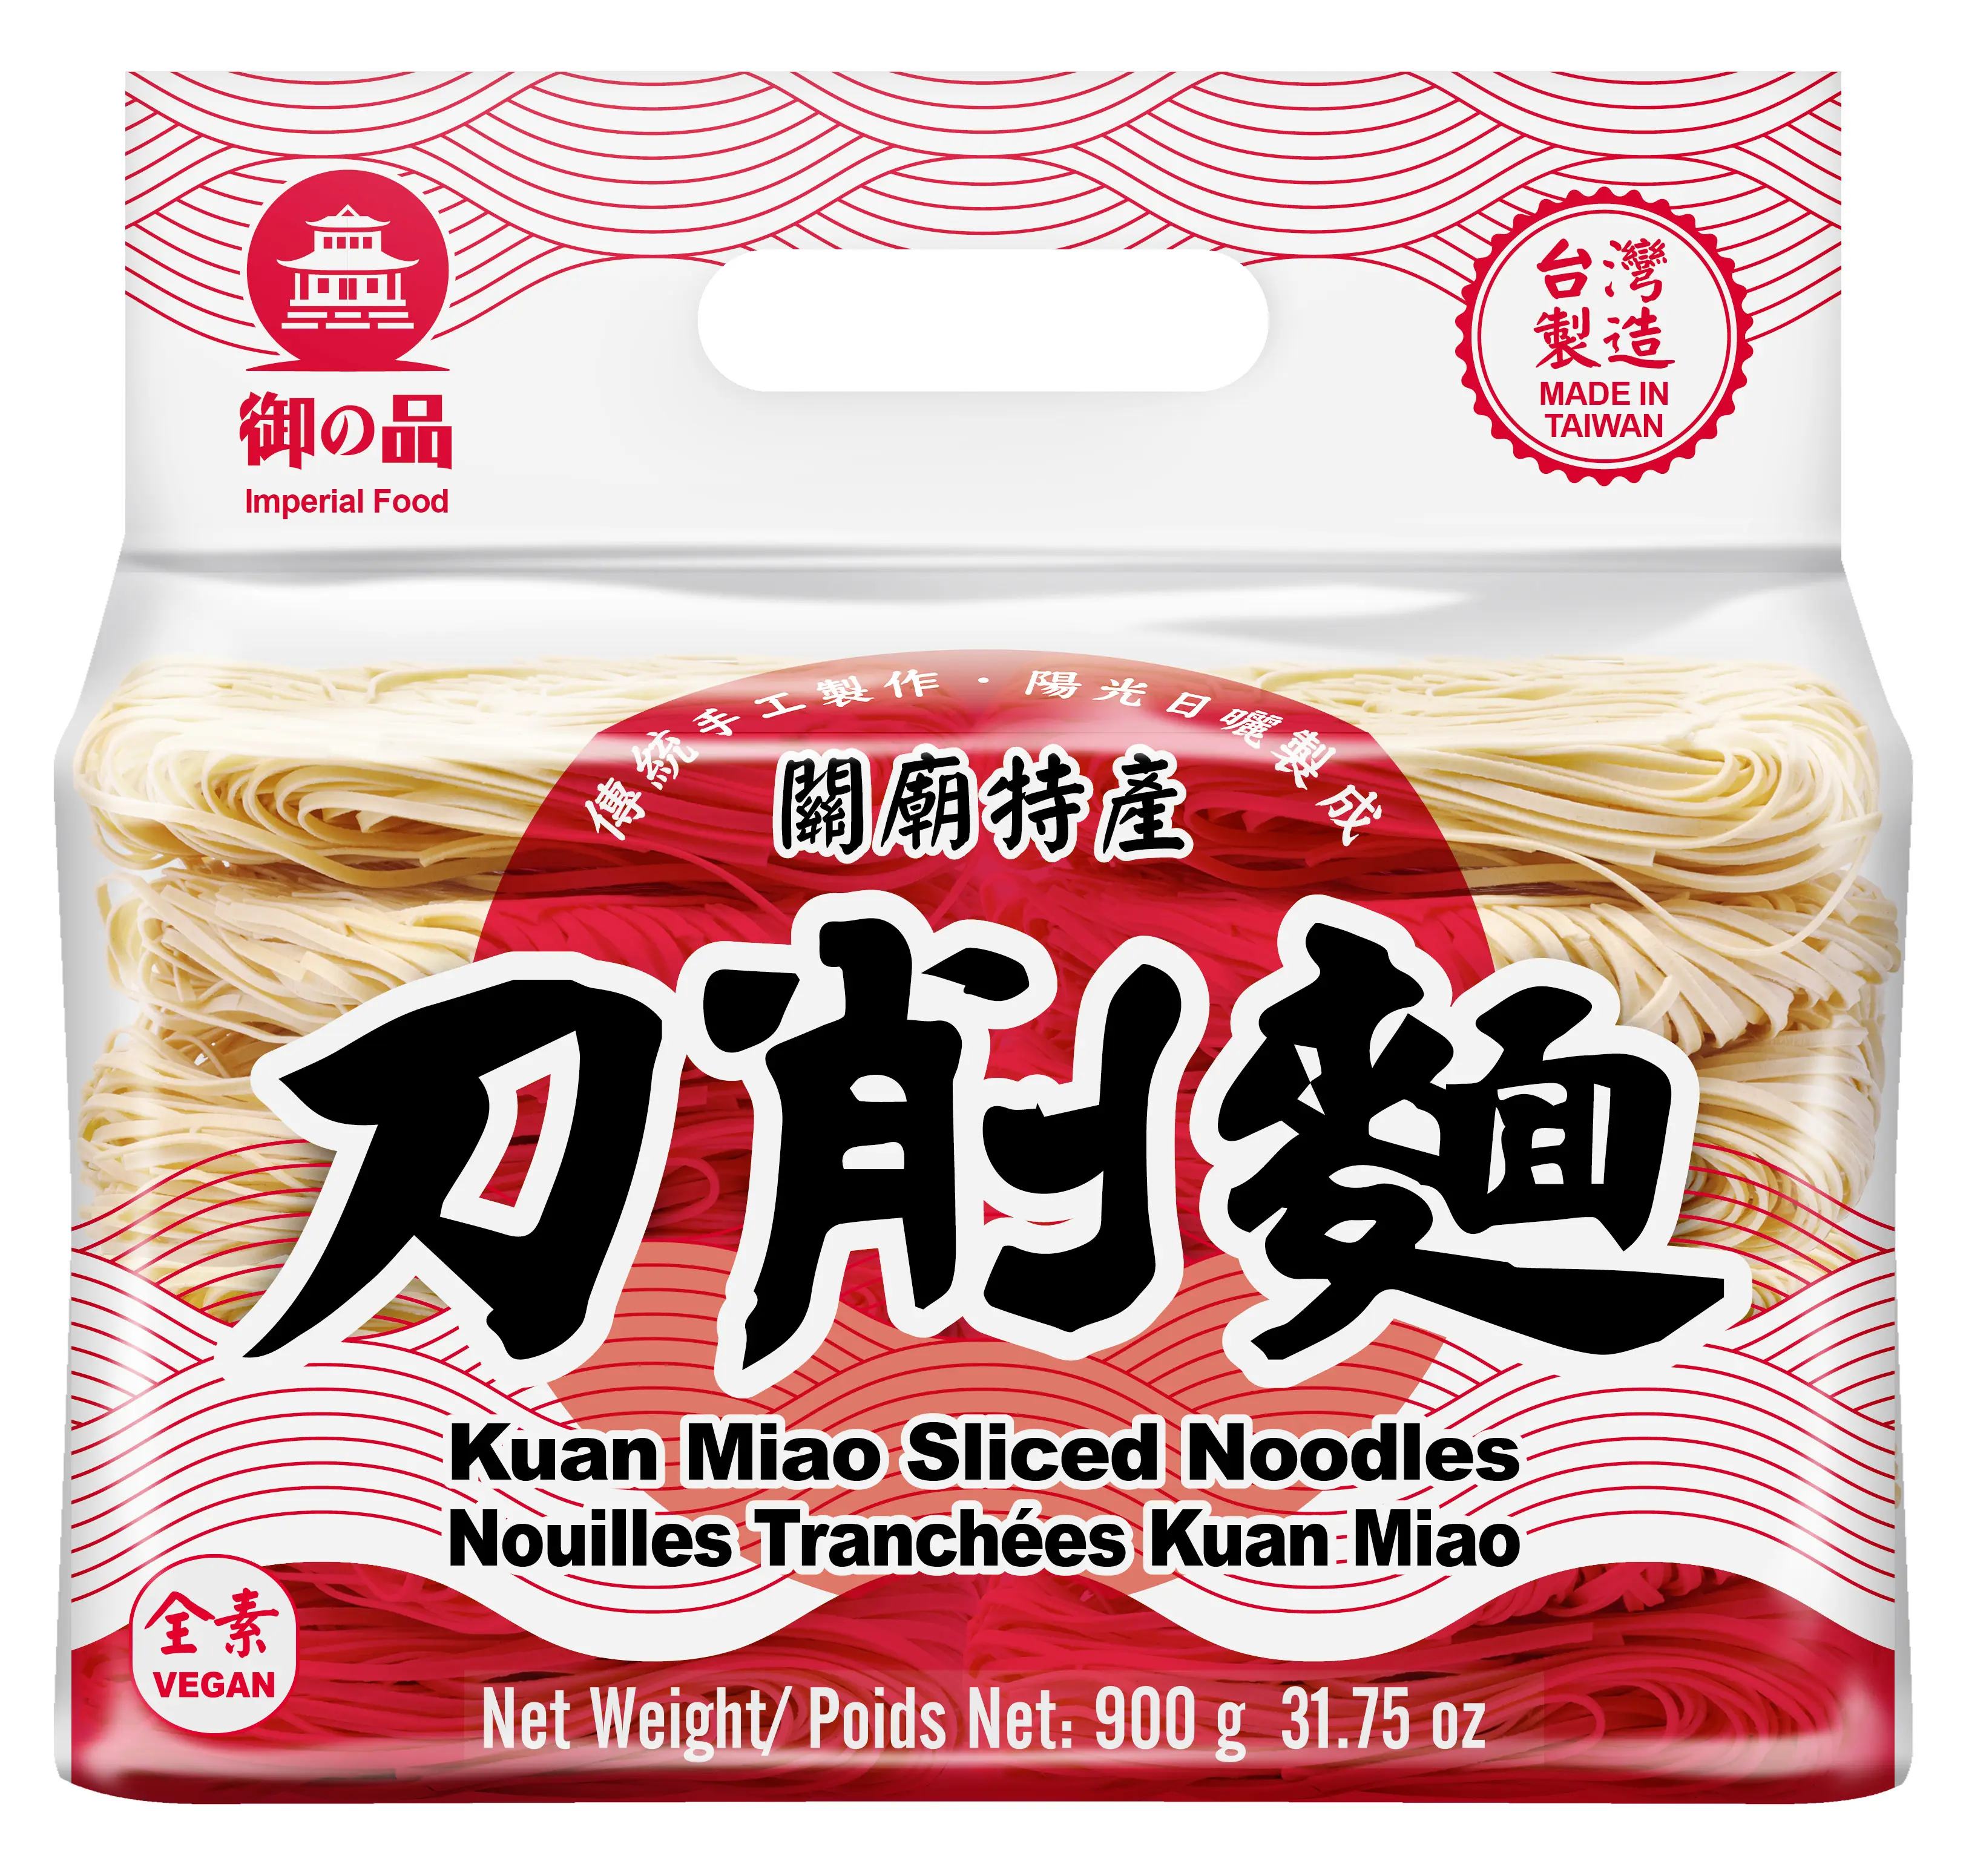 Taiwan Instant Rice Tapioca Sliced Noodles Healthy Noodles Kuan Miao China slim noodles